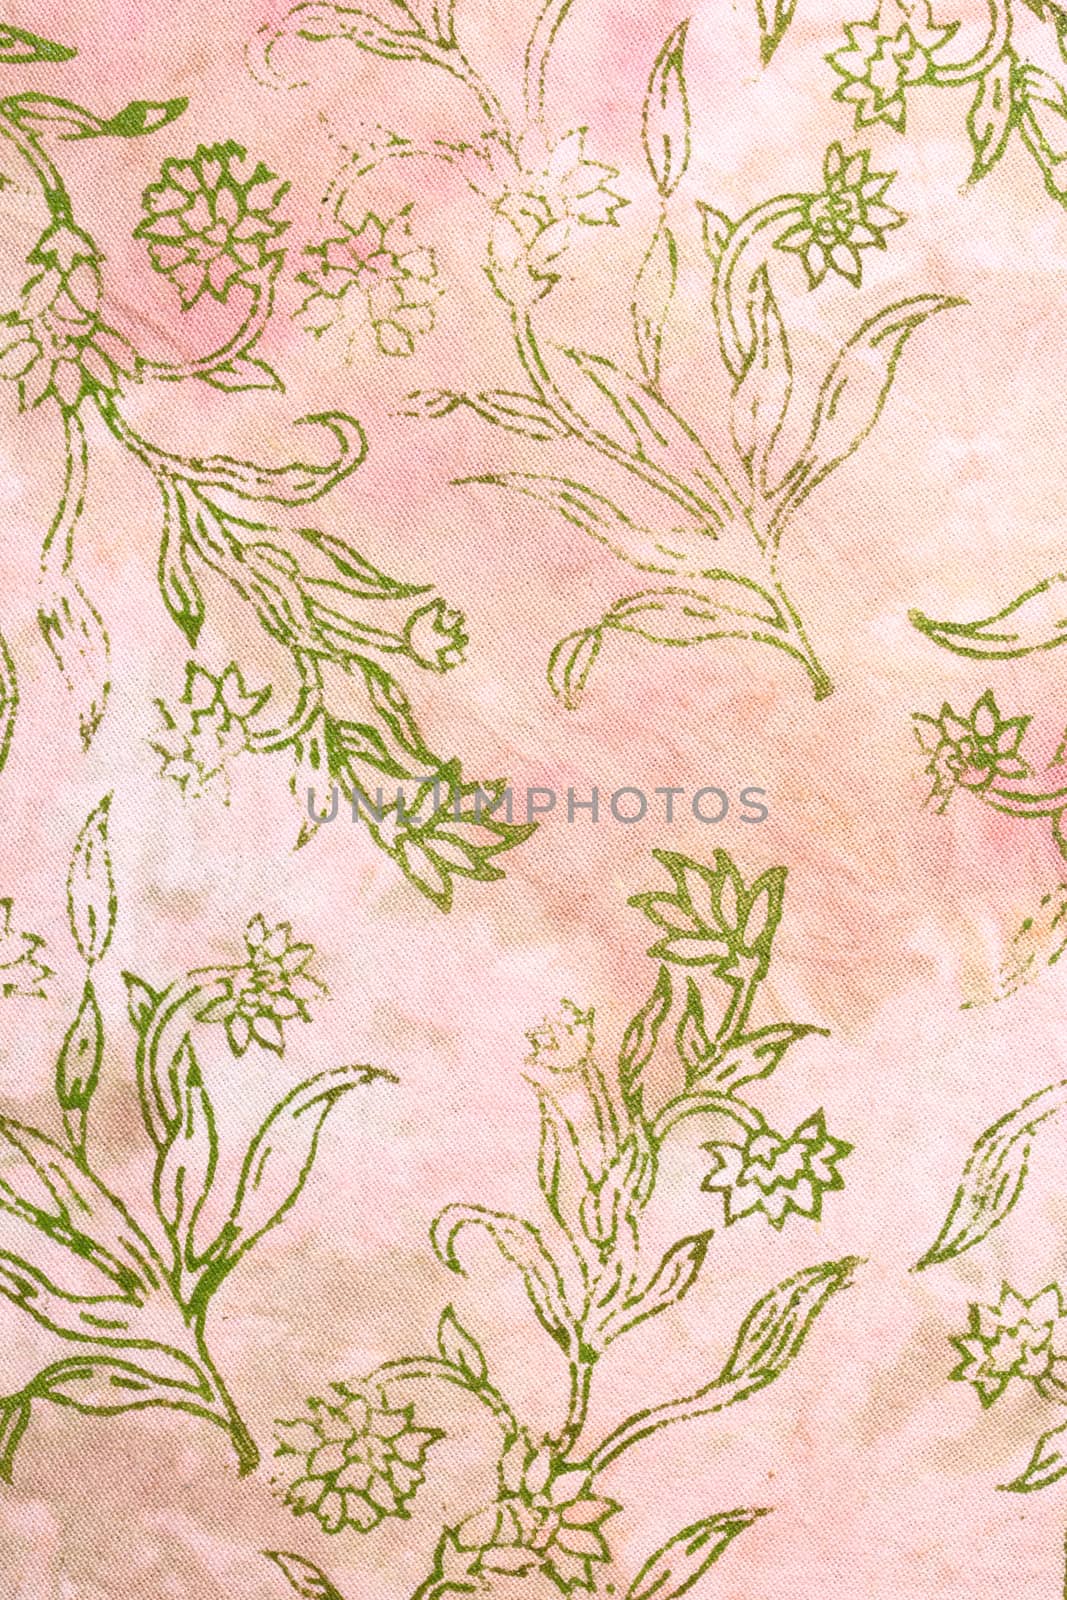 Silk batik with abstract flowers